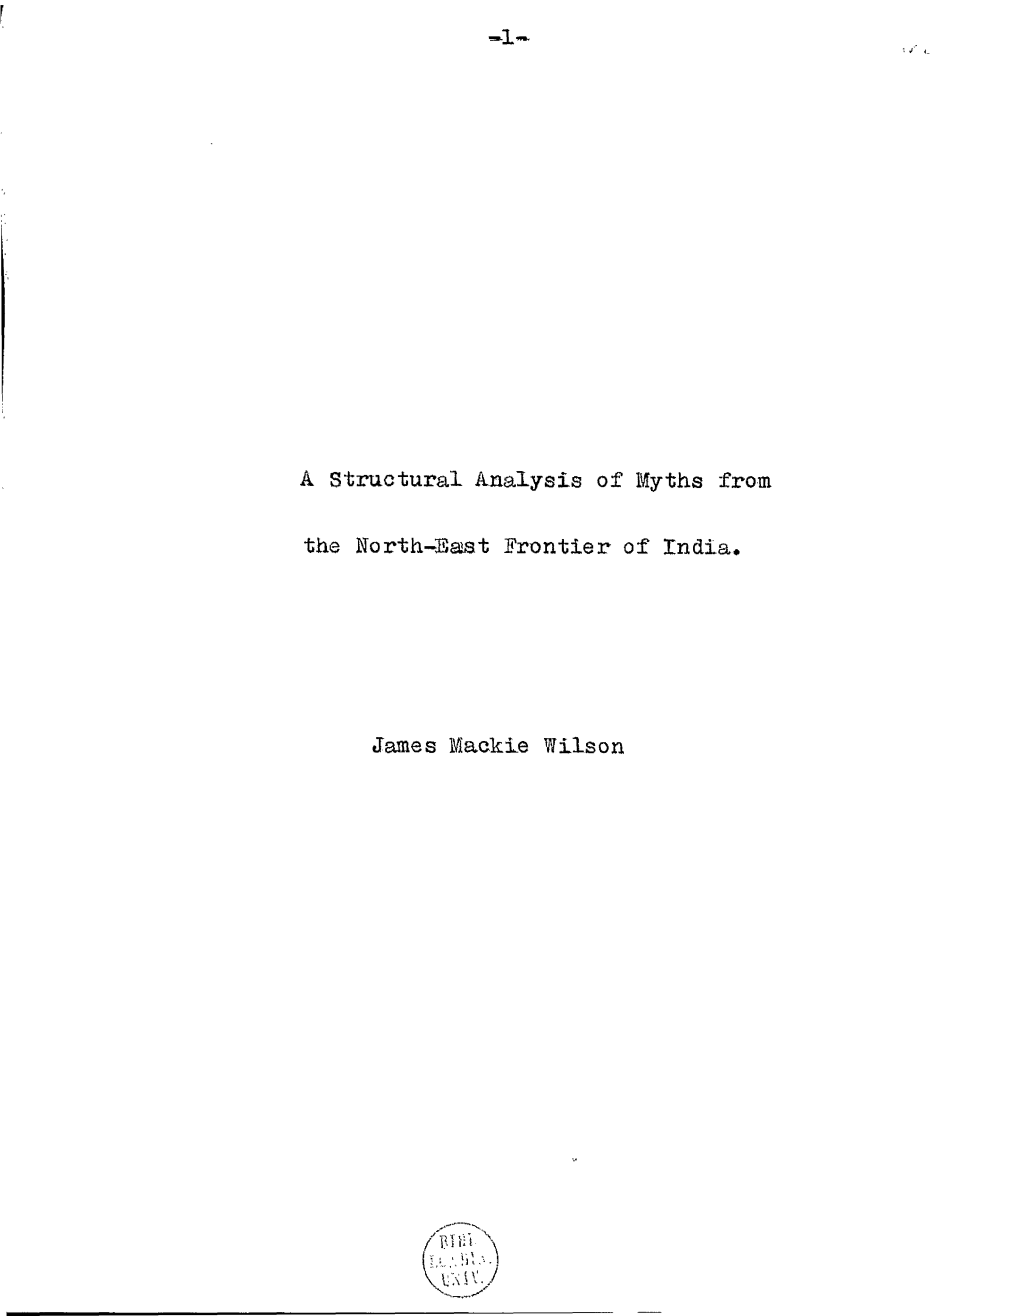 A Structural Analysis of Myths from the North-Bast Frontier of India. James Mackie Wilson